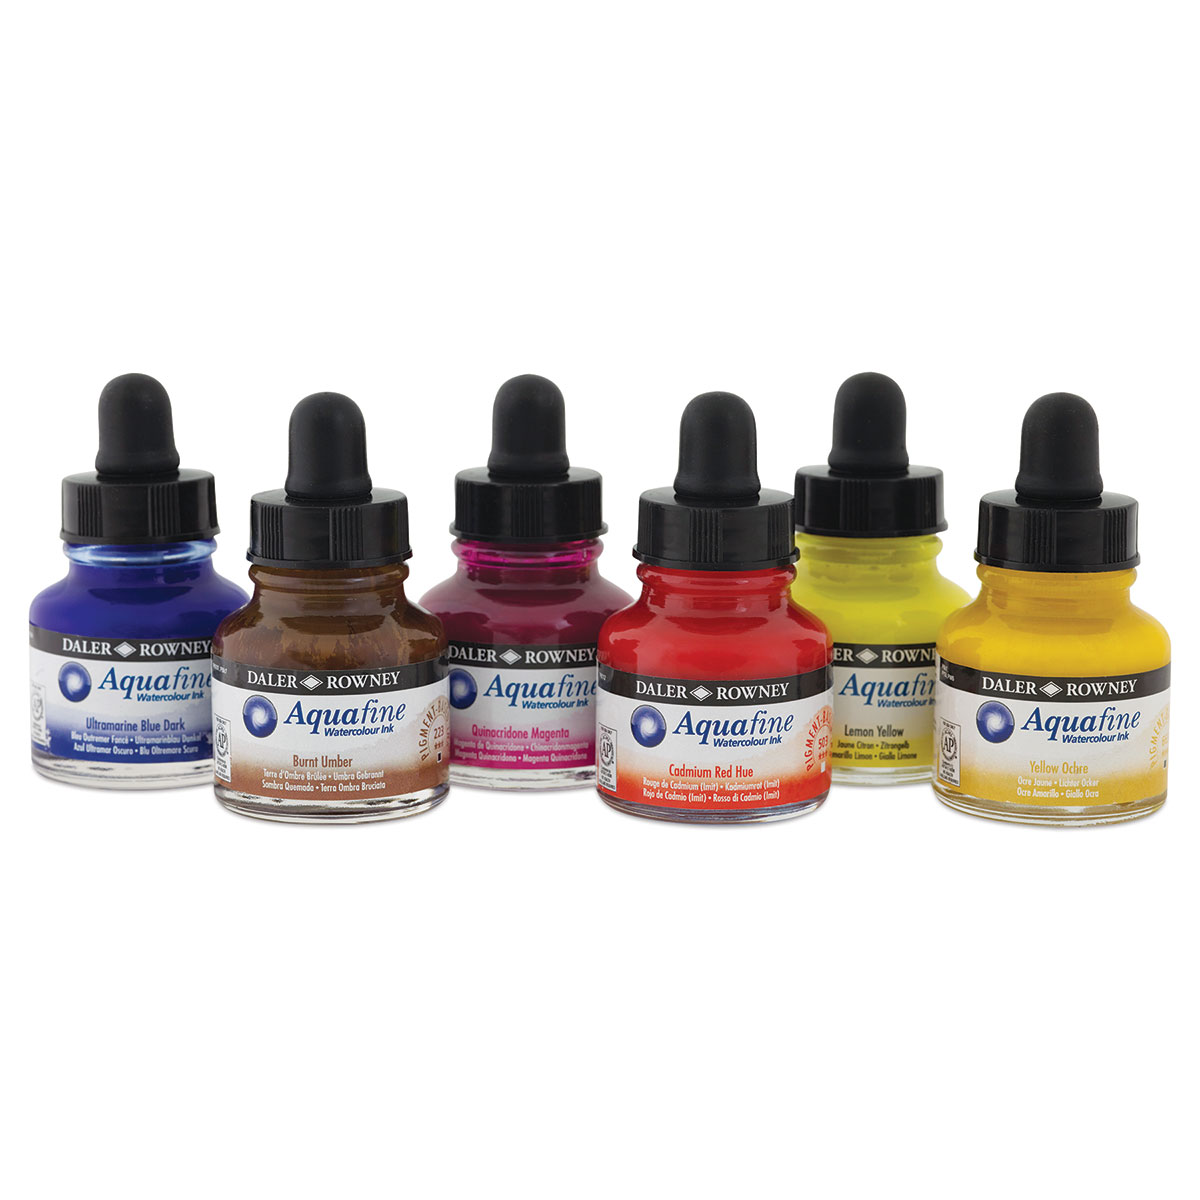 Daler-Rowney Aquafine Watercolour Inks and Sets